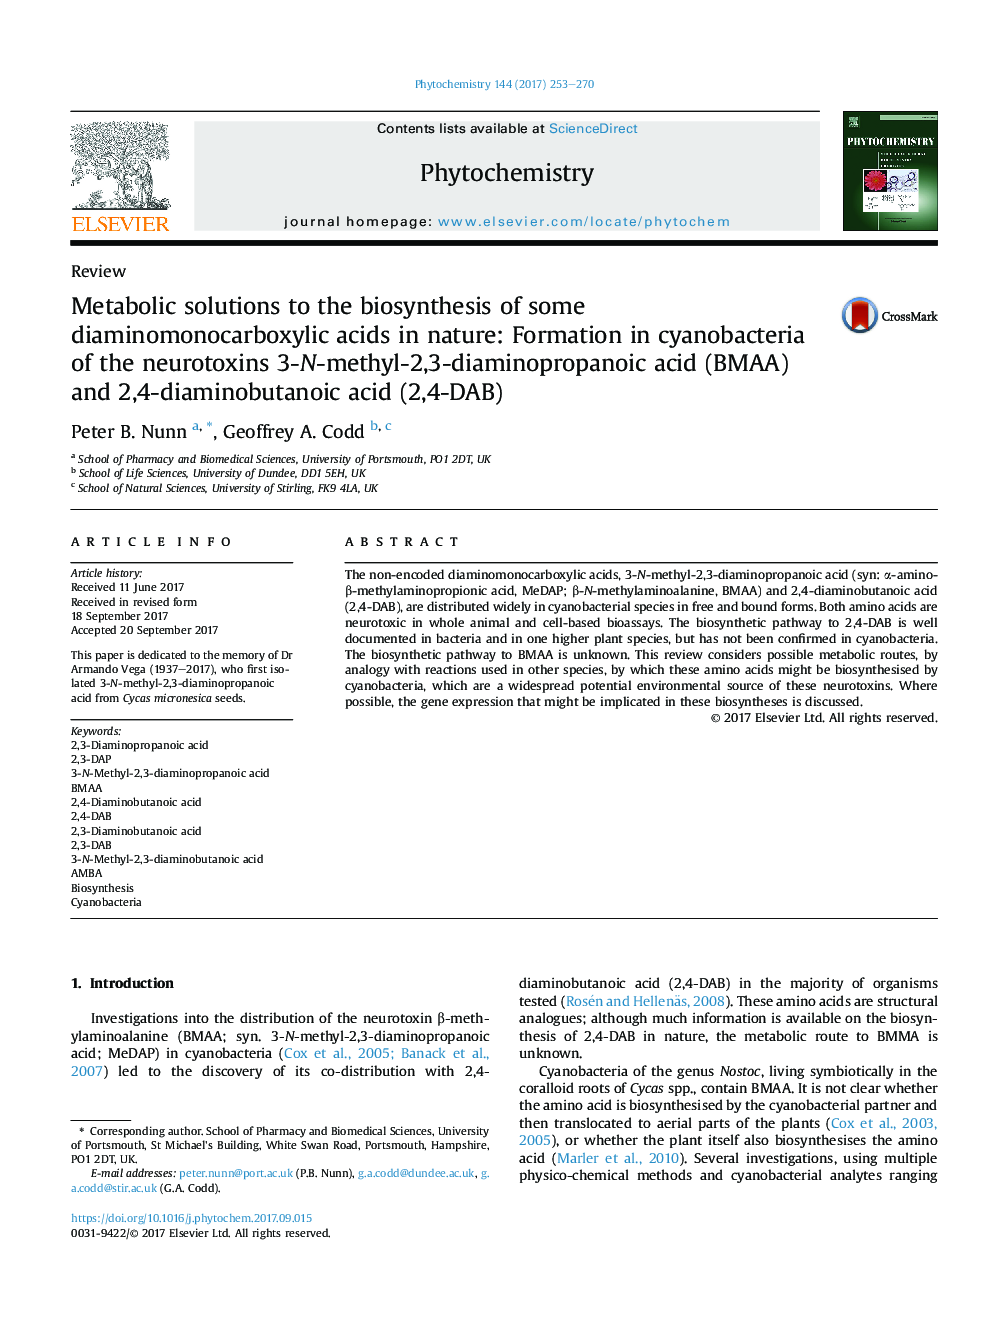 Metabolic solutions to the biosynthesis of some diaminomonocarboxylic acids in nature: Formation in cyanobacteria of the neurotoxins 3-N-methyl-2,3-diaminopropanoic acid (BMAA) and 2,4-diaminobutanoic acid (2,4-DAB)